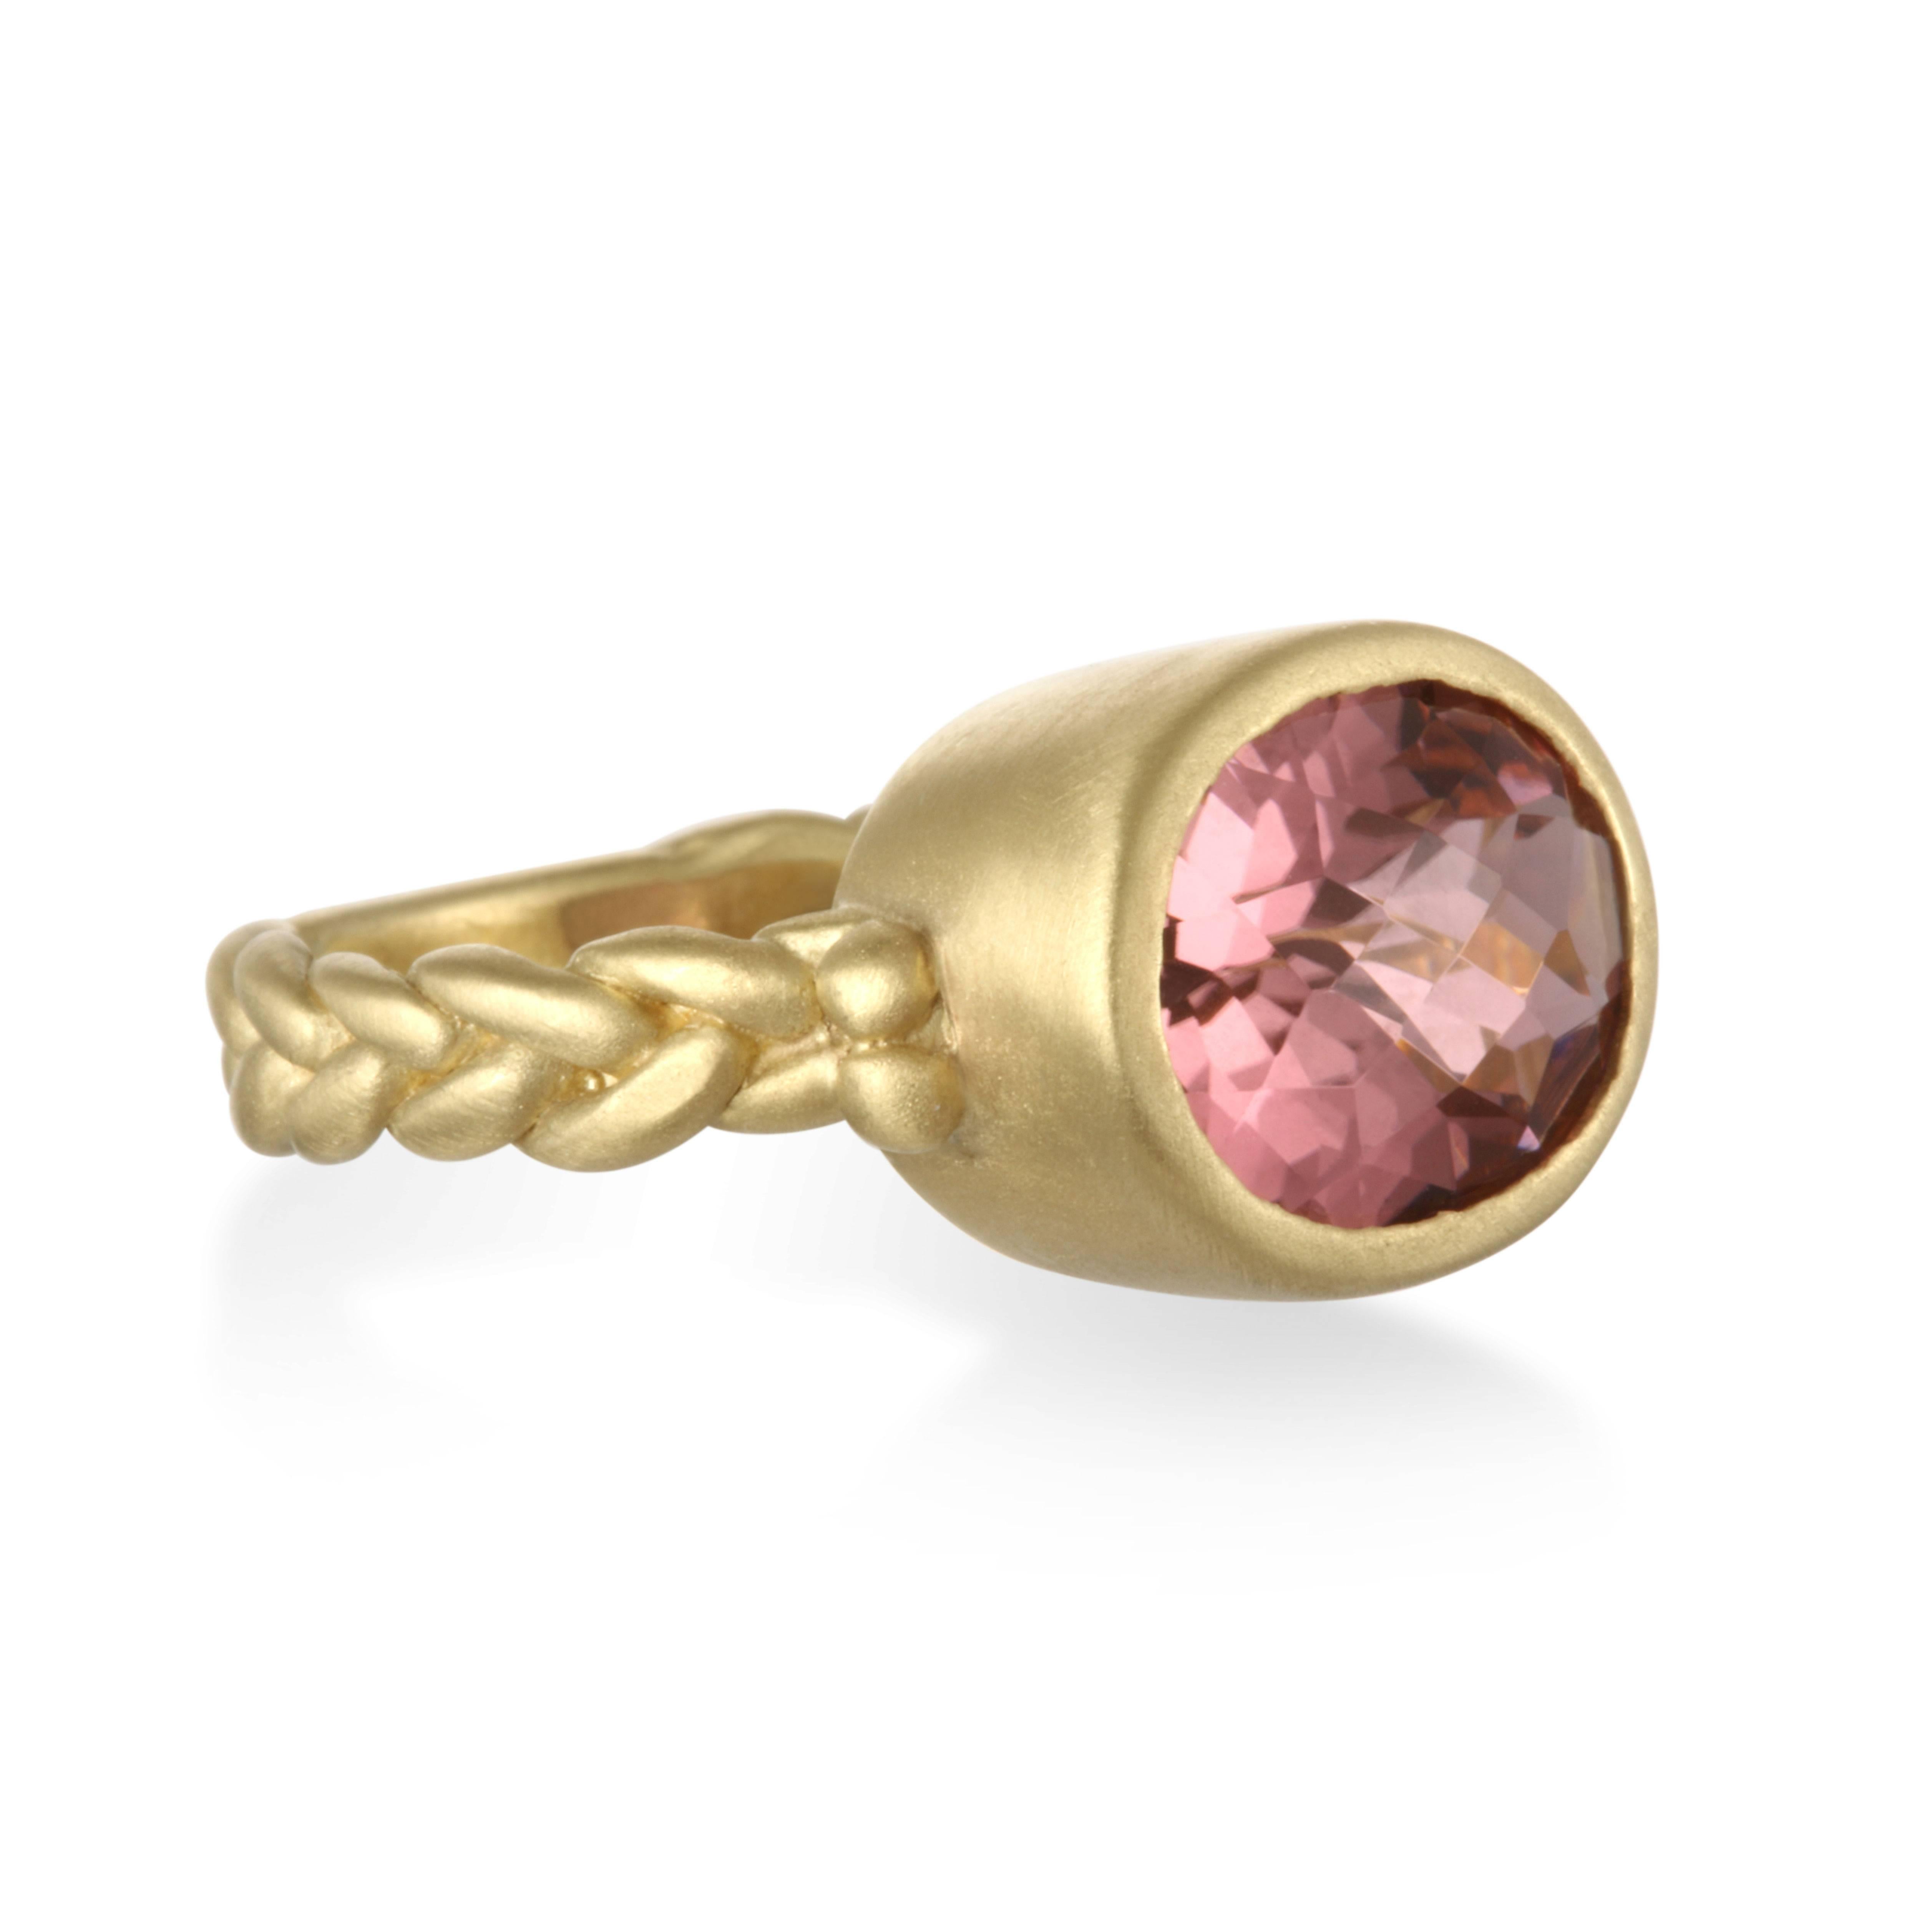 Feel pretty in pink!  Faceted Pink Tourmaline set in a 18k green gold* bezel setting with a braided shank.  Ring is approximately 3/4" wide with a 4mm braided half round shank.  The Pink Tourmaline is a faceted oval and 12x10mm.  Matte Finish.